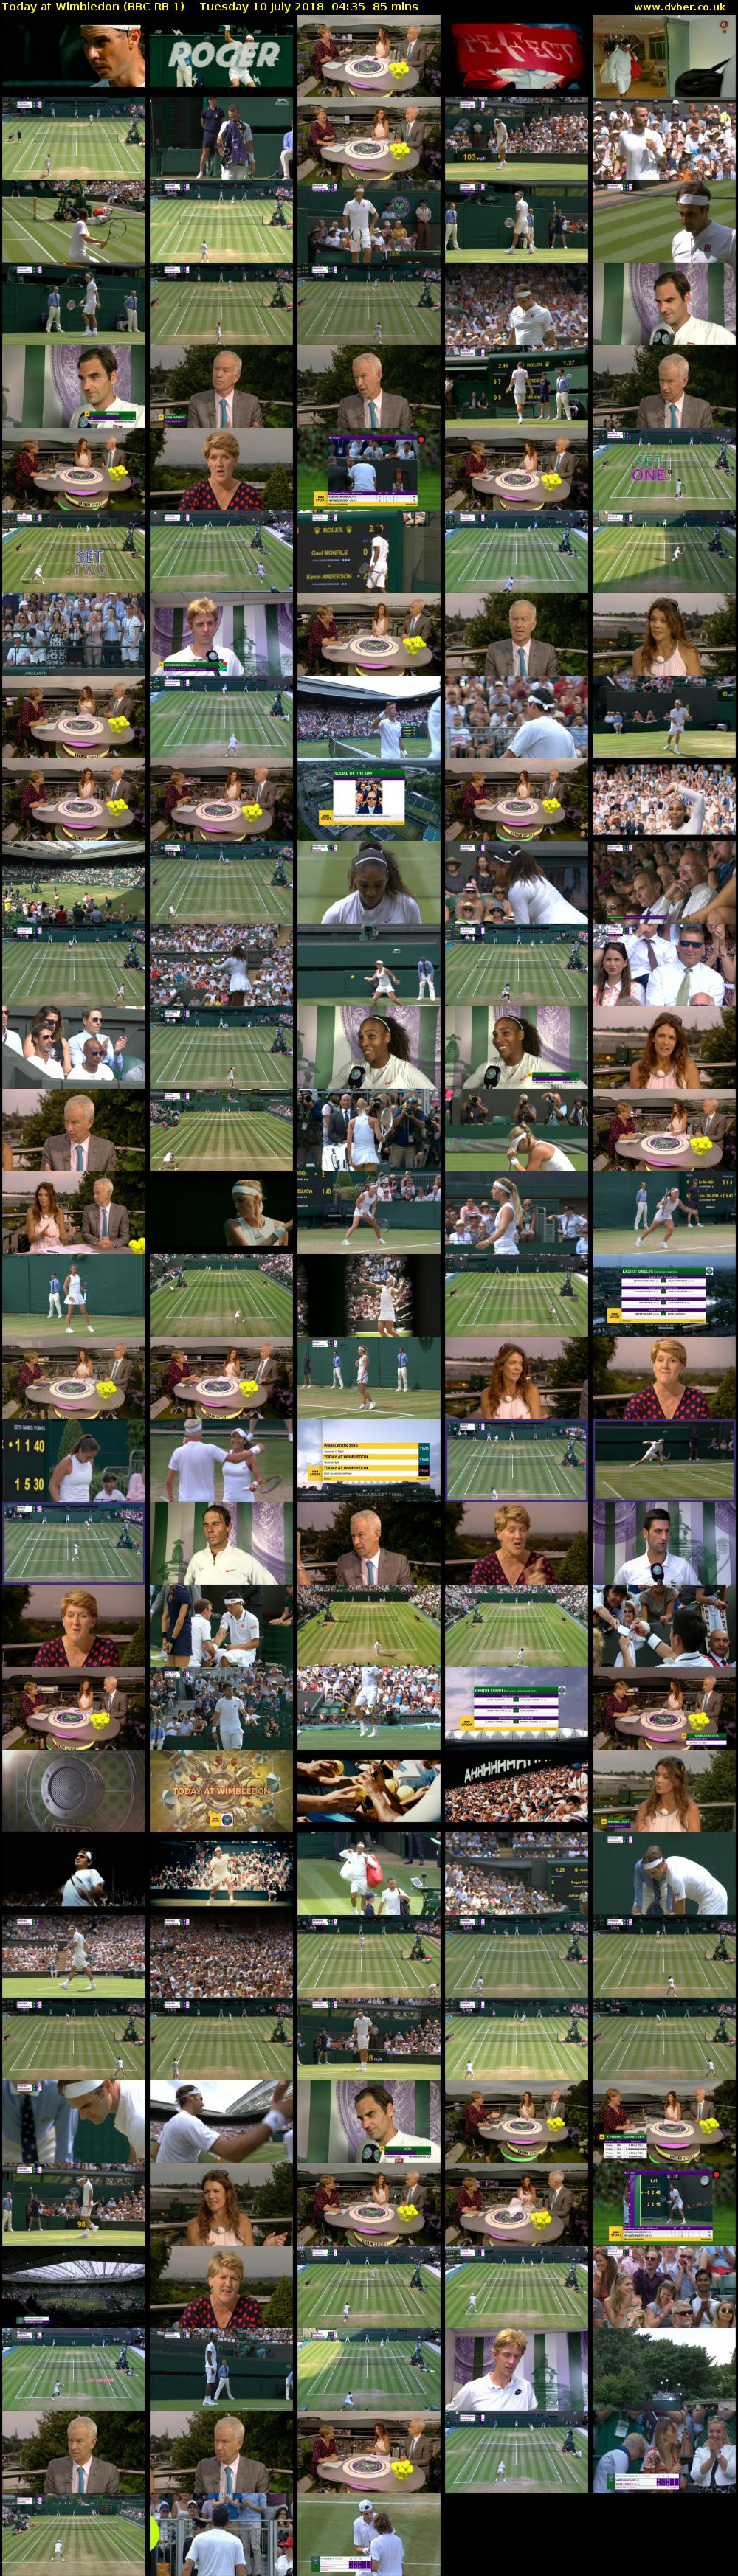 Today at Wimbledon (BBC RB 1) Tuesday 10 July 2018 04:35 - 06:00